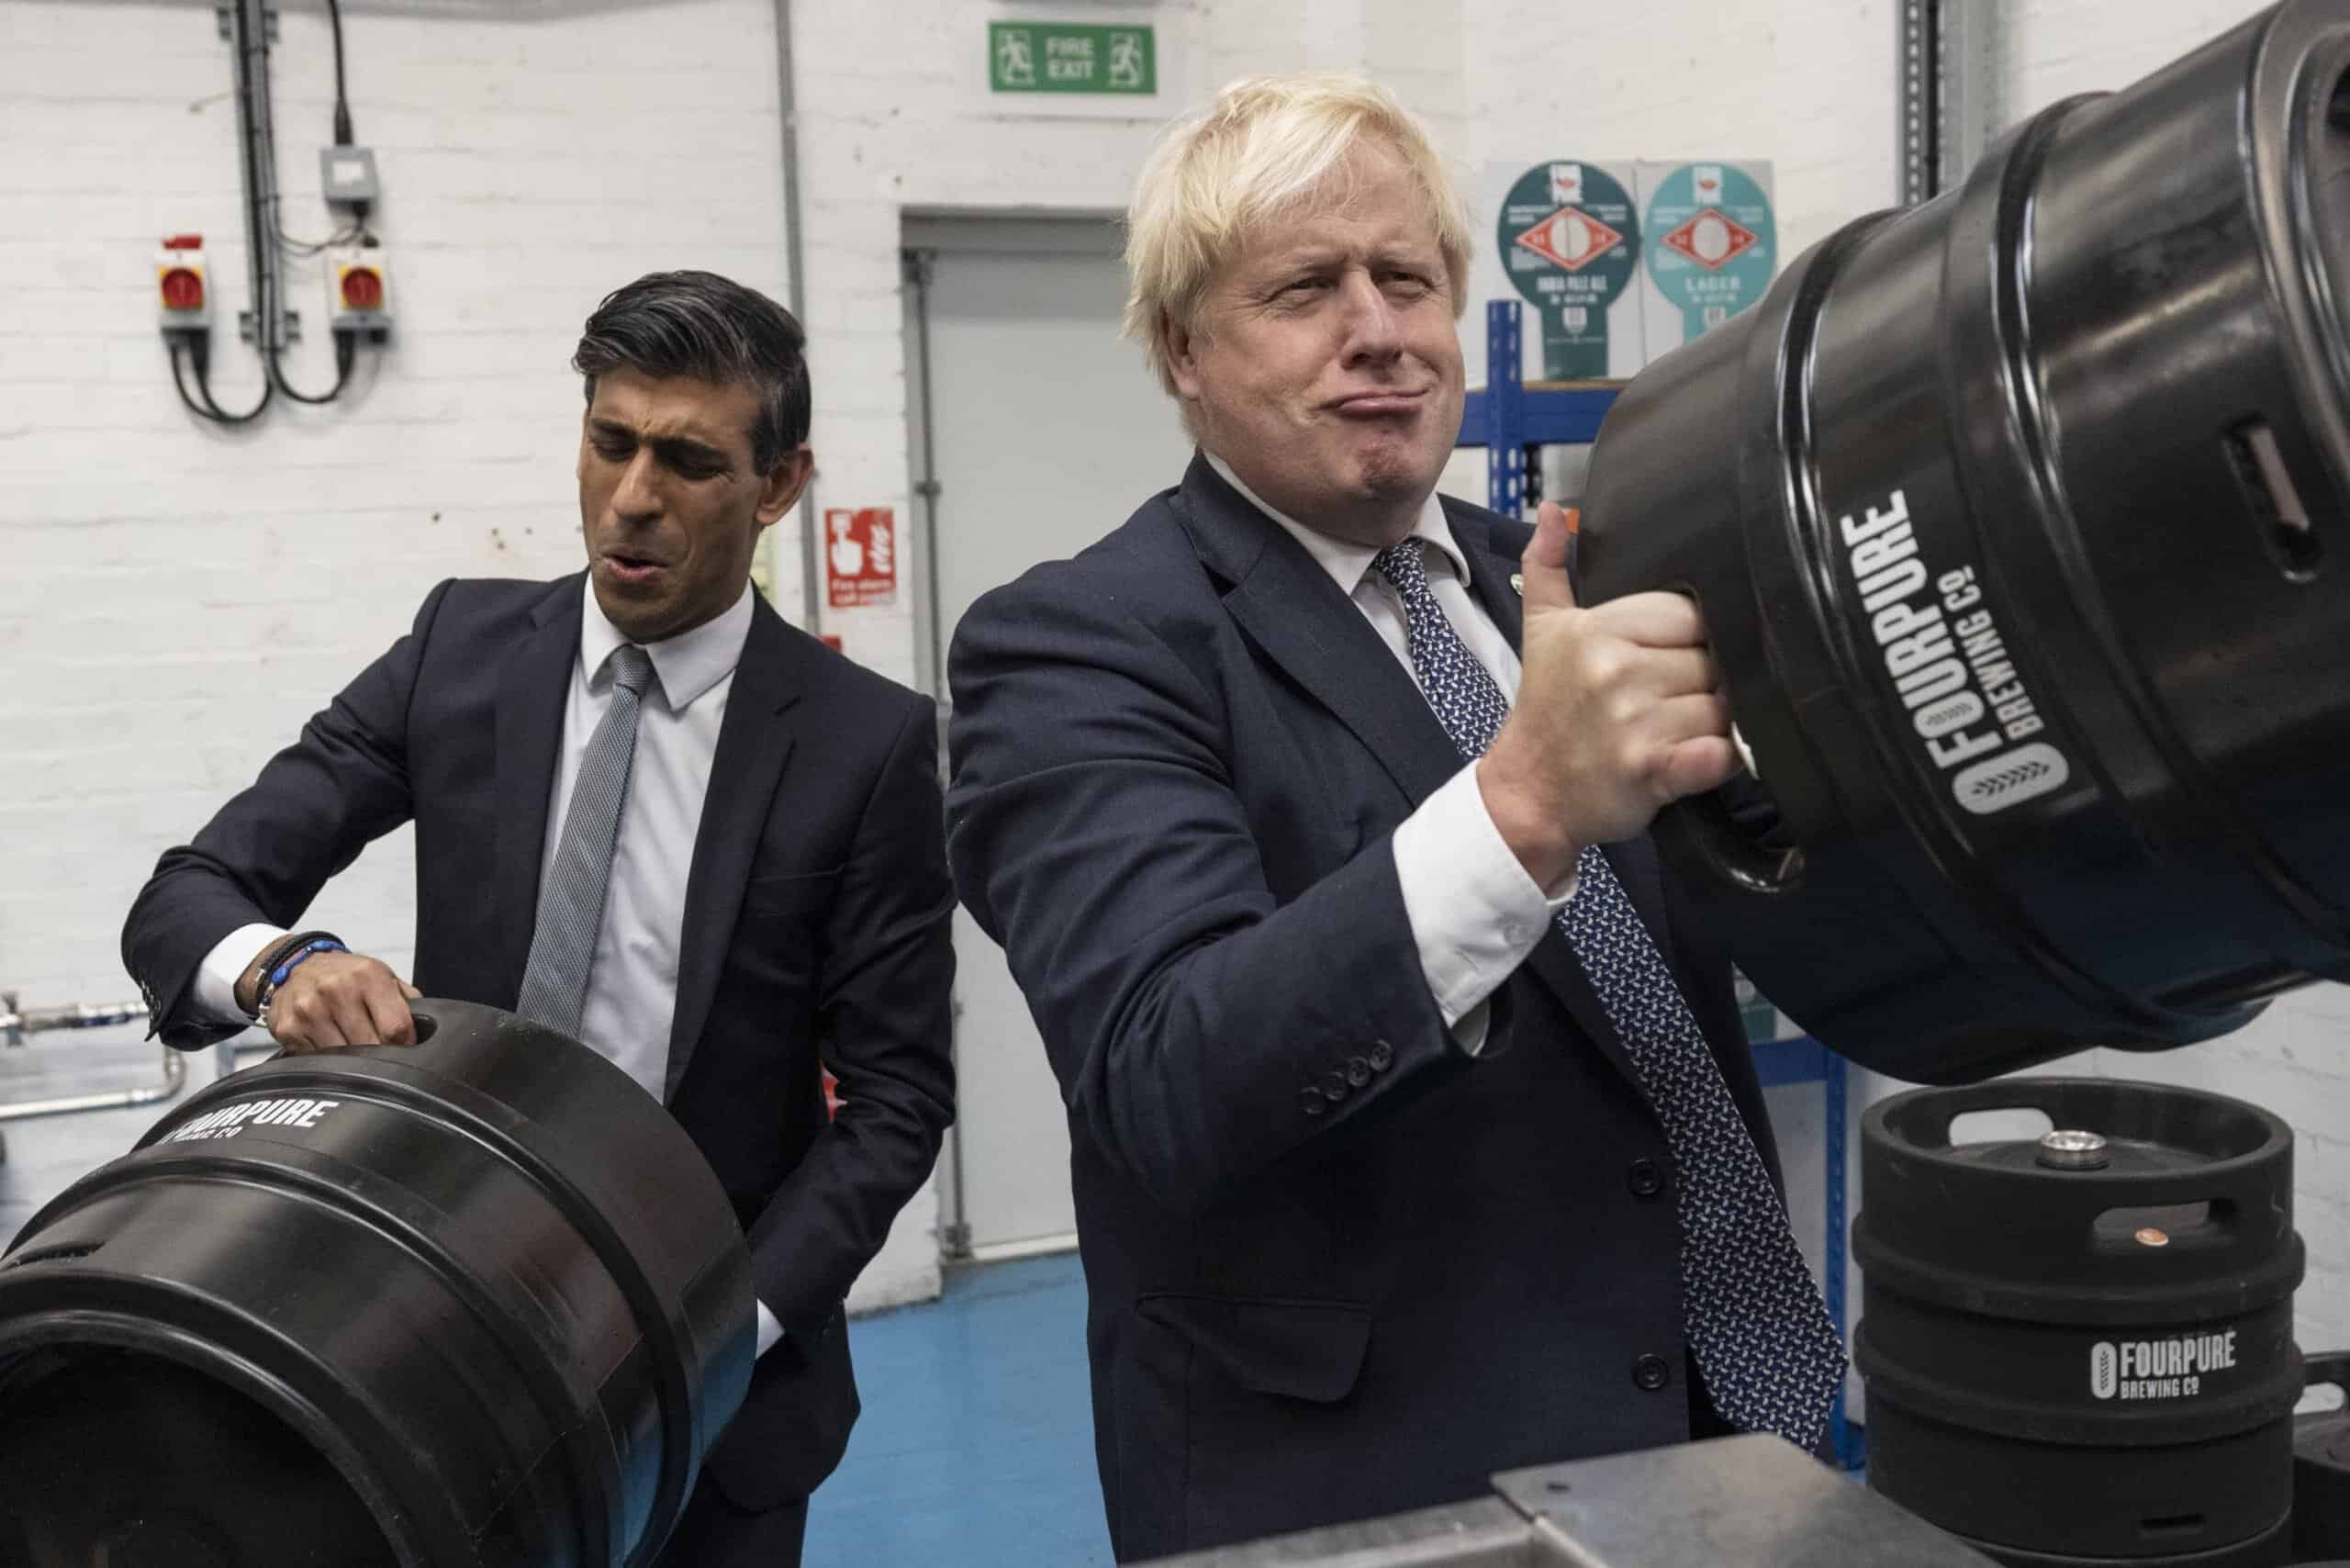 Johnson no longer expected on campaign trail as he jets off on holiday